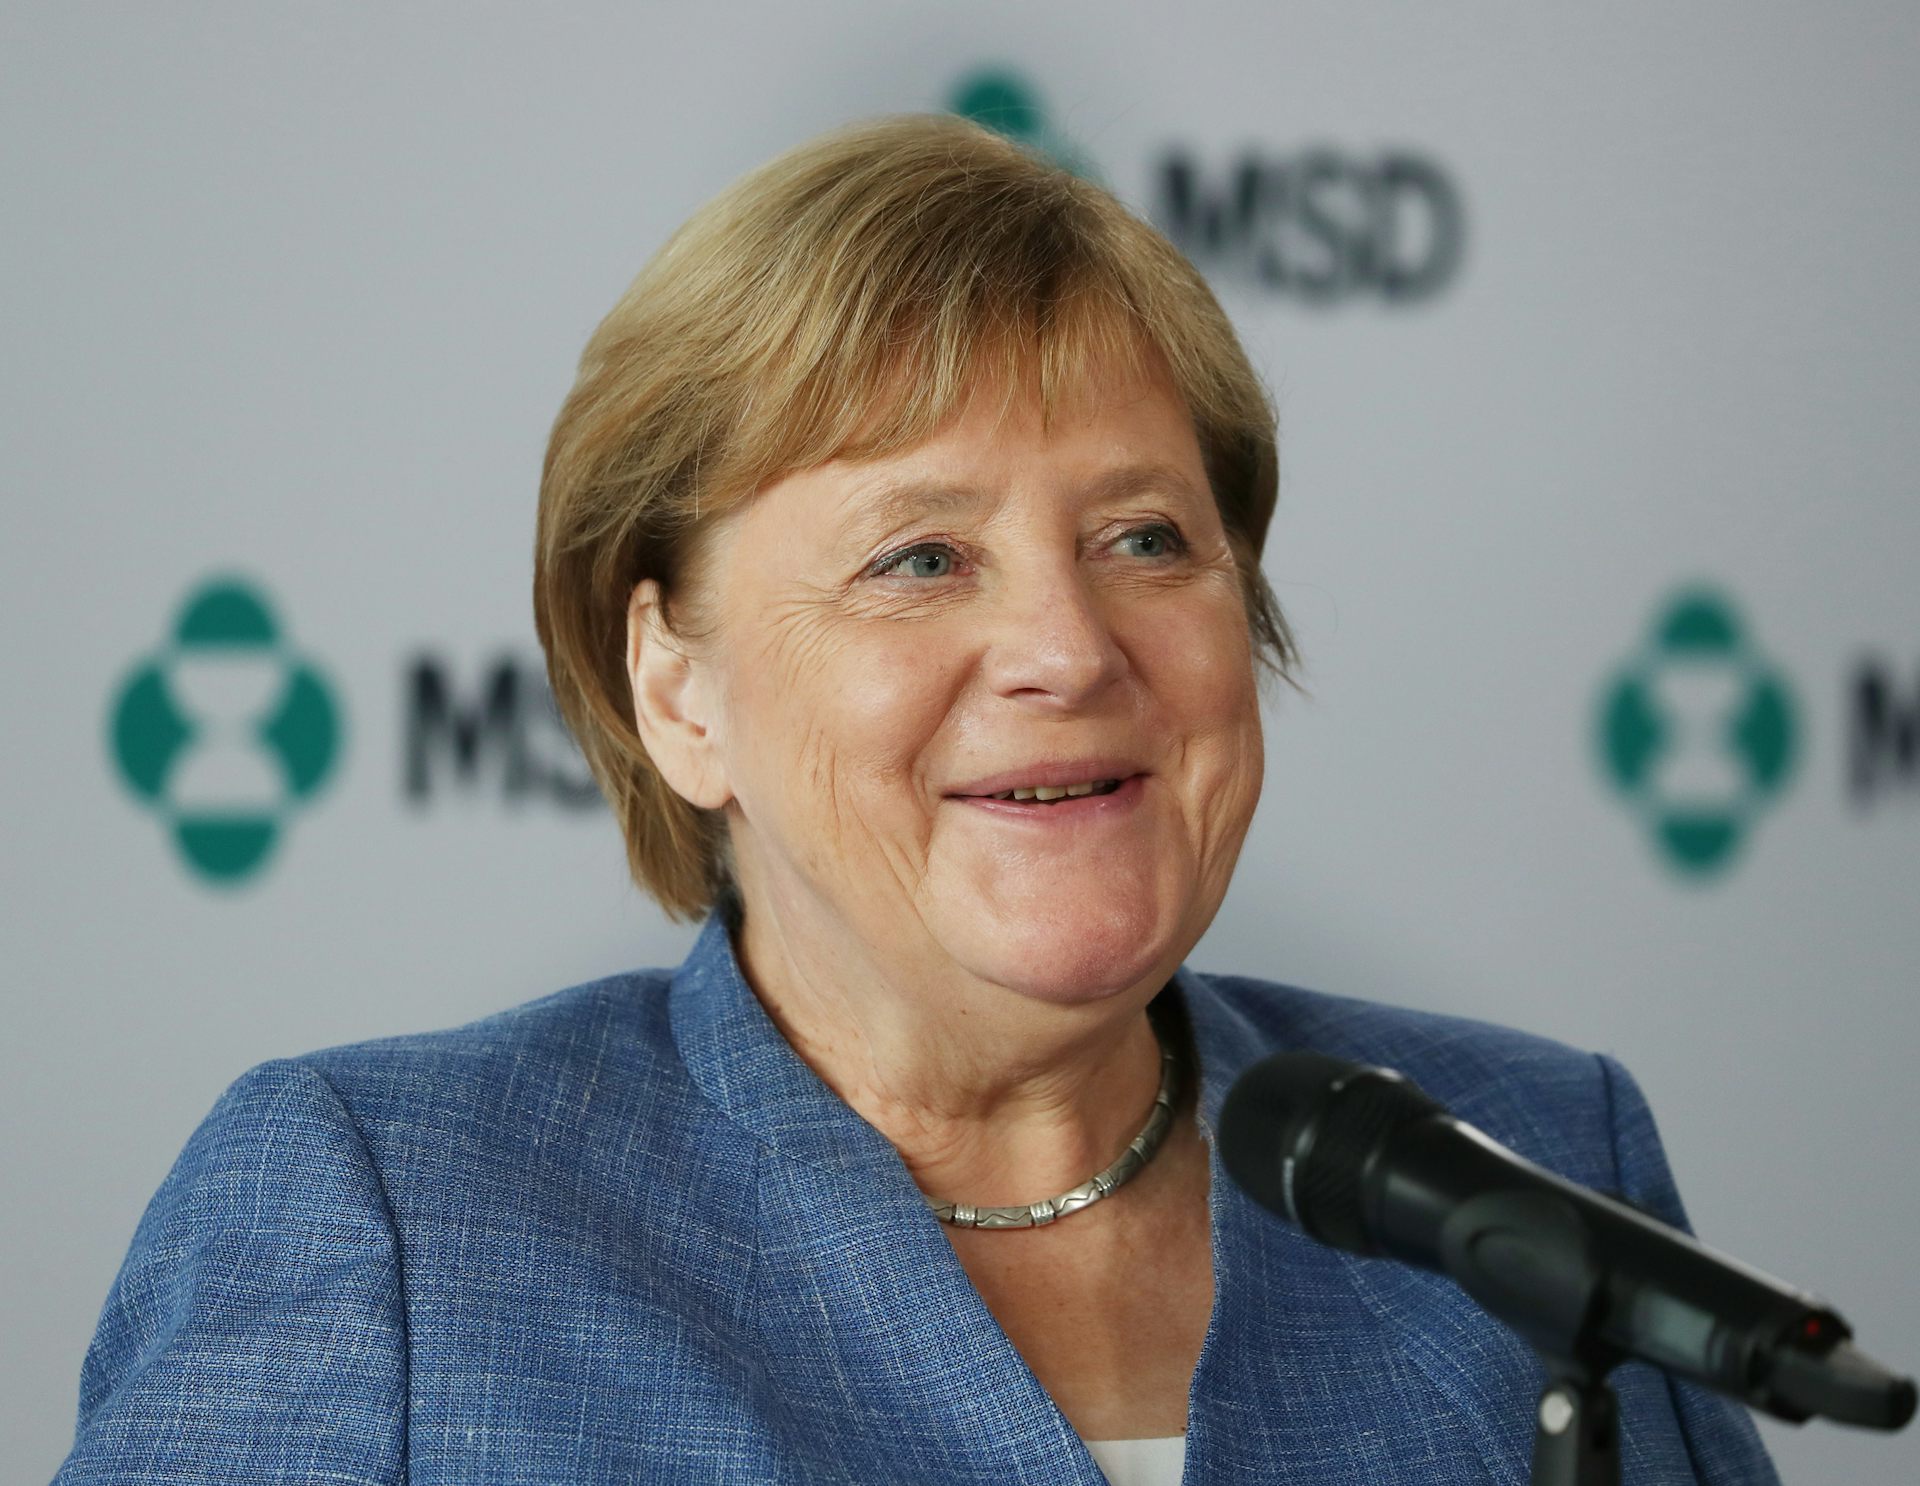 From Mädchen to Mutti as Angela Merkel departs, she leaves a great legacy of leadership photo